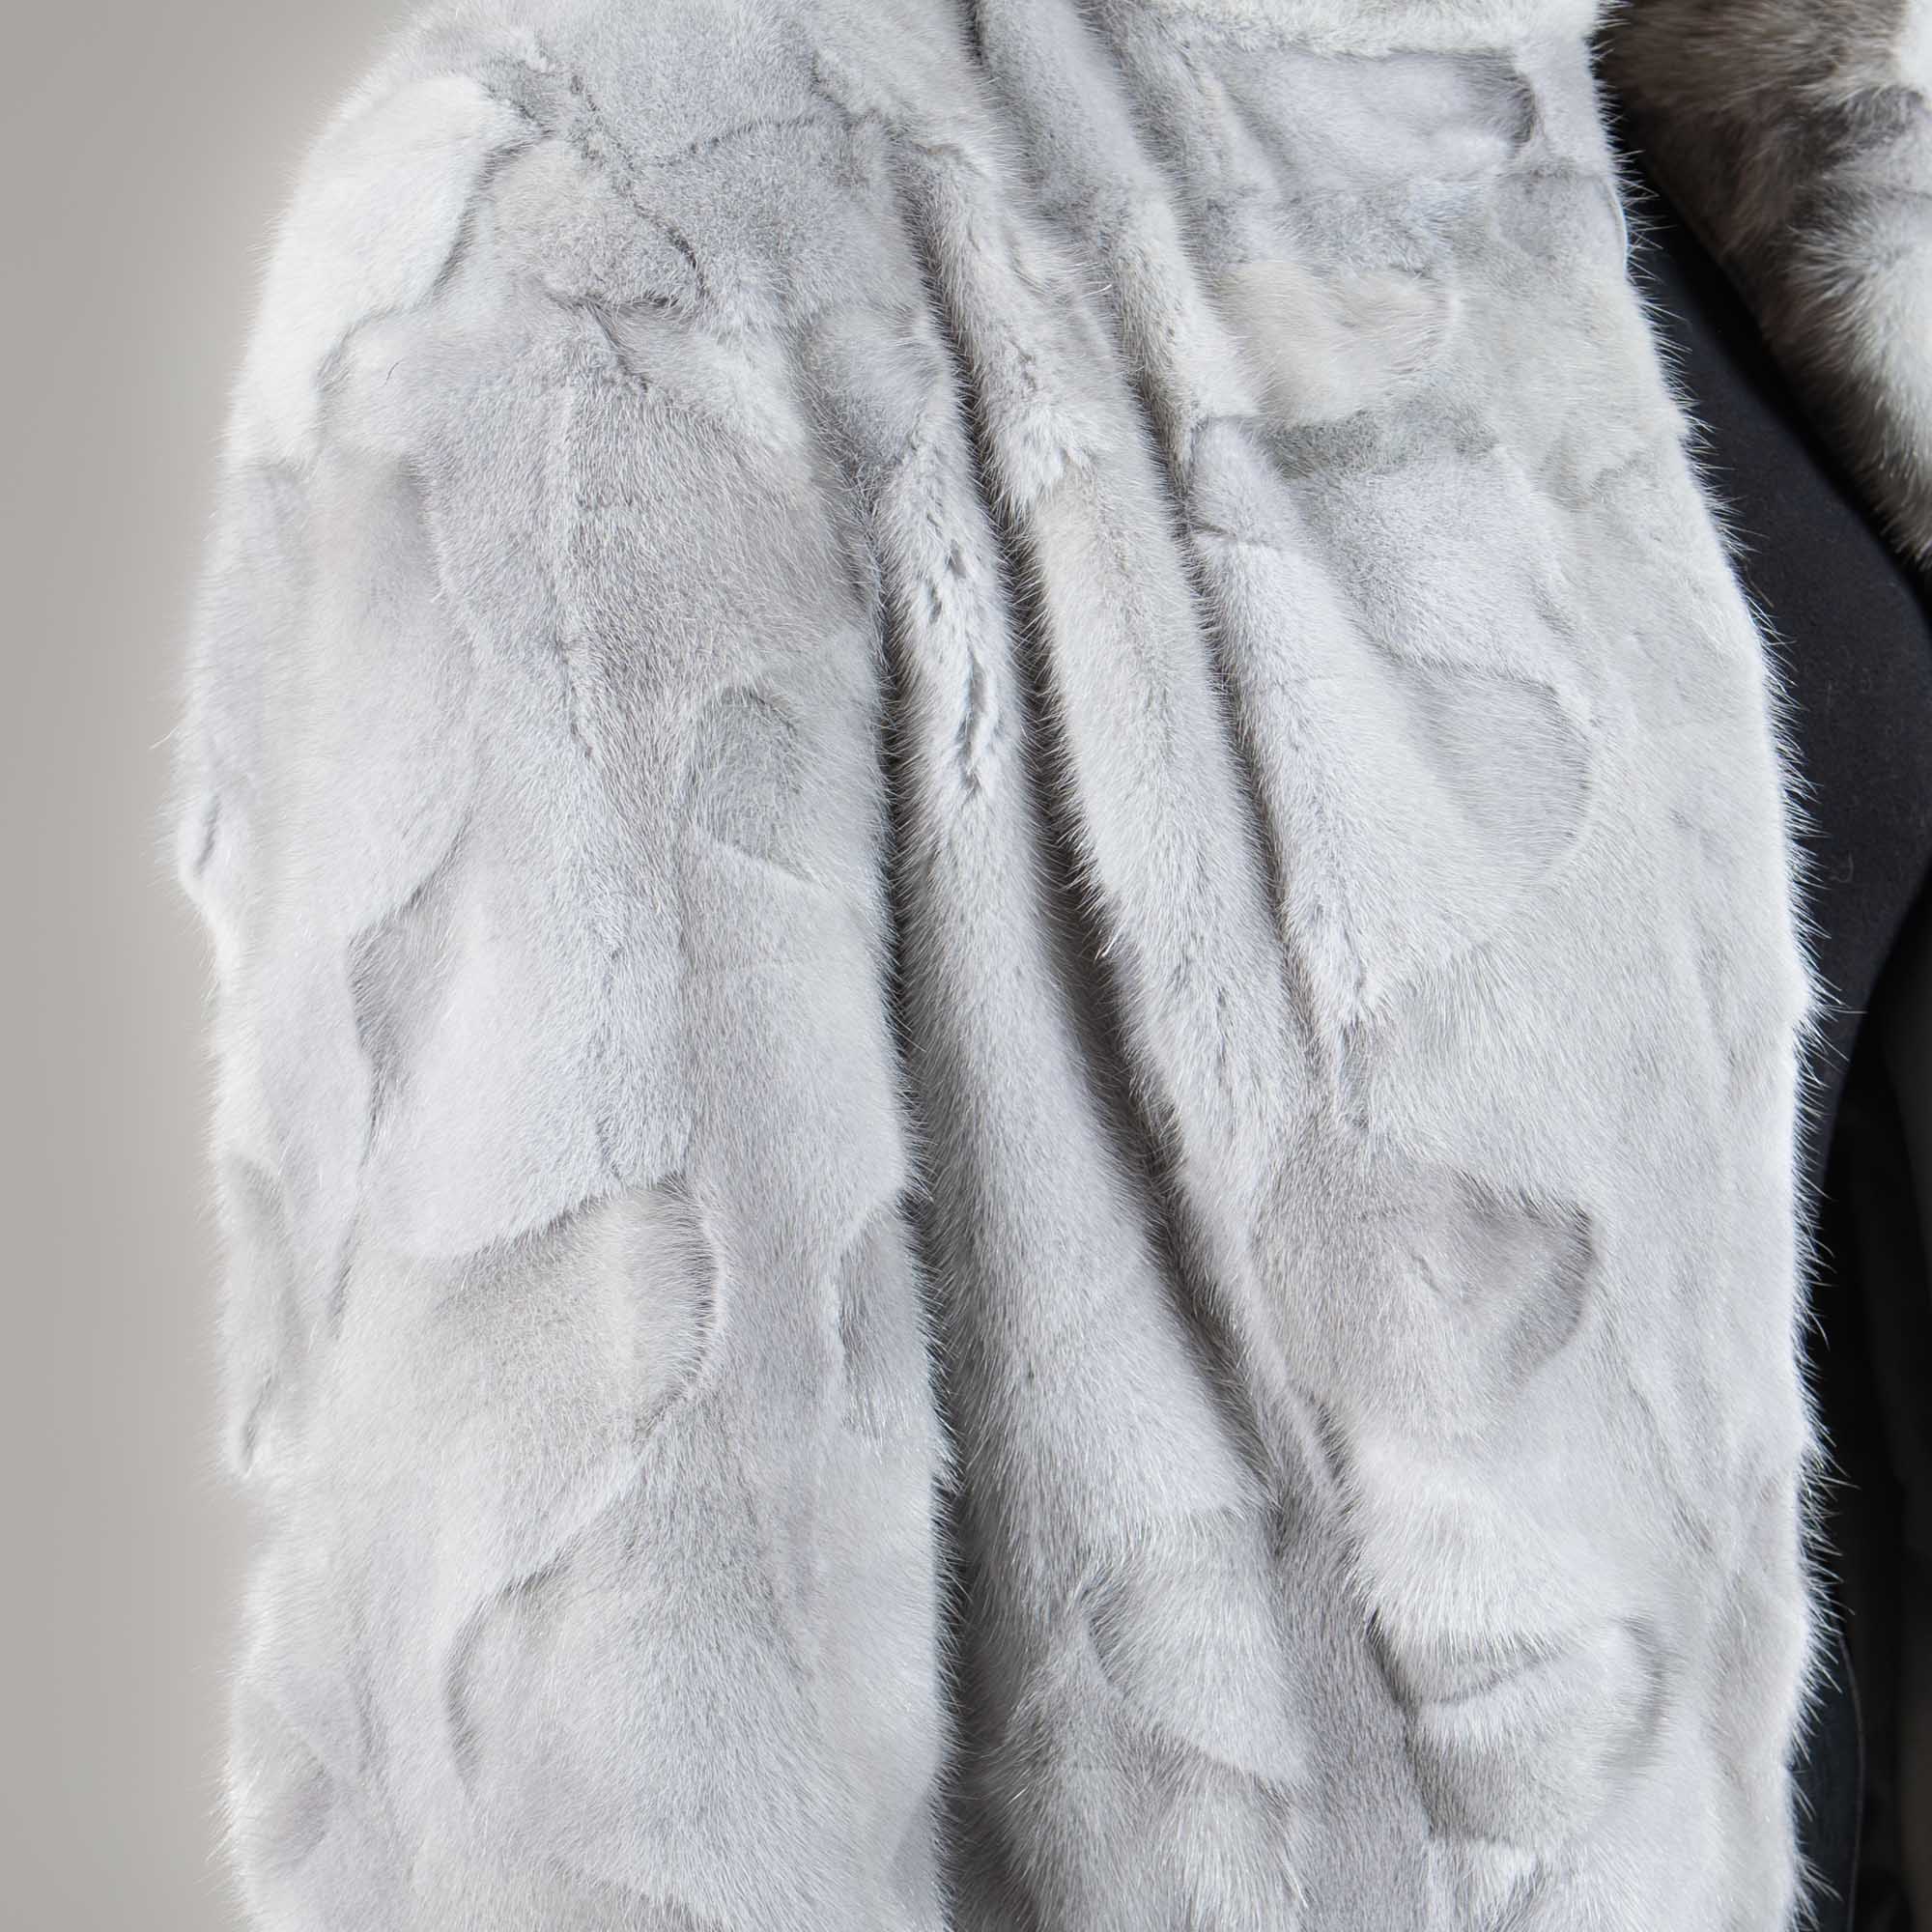 Mink fur jacket with a collar in gray color